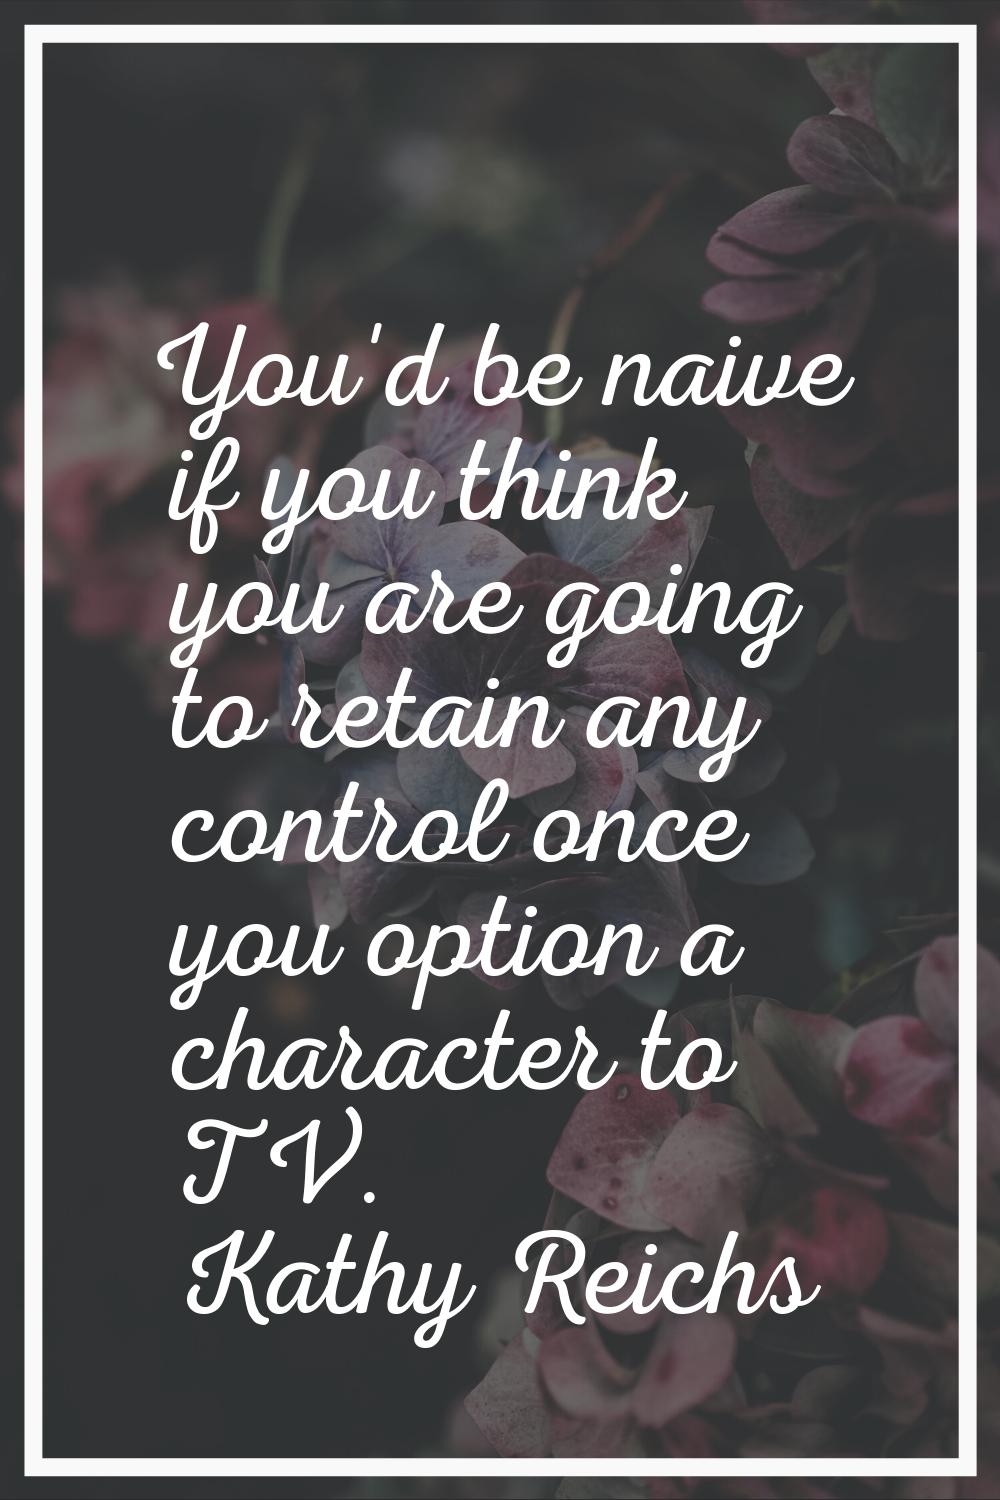 You'd be naive if you think you are going to retain any control once you option a character to TV.